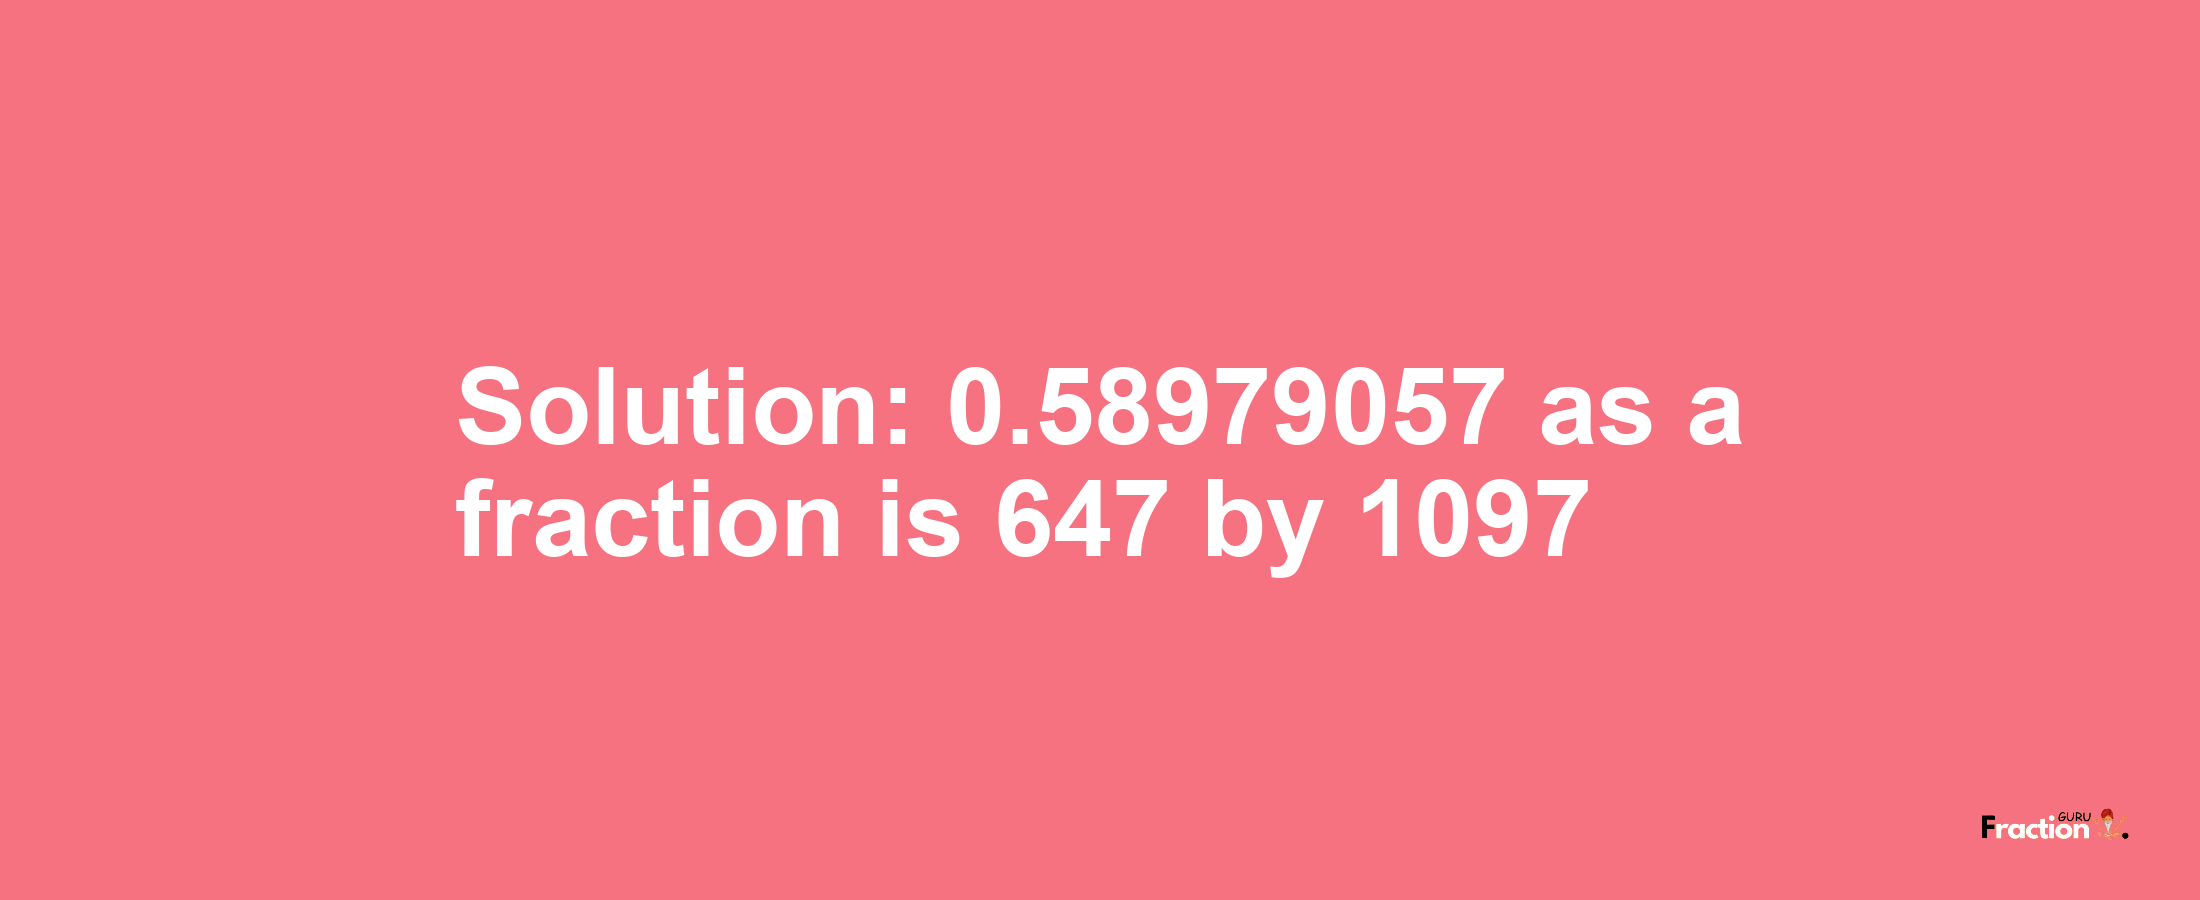 Solution:0.58979057 as a fraction is 647/1097